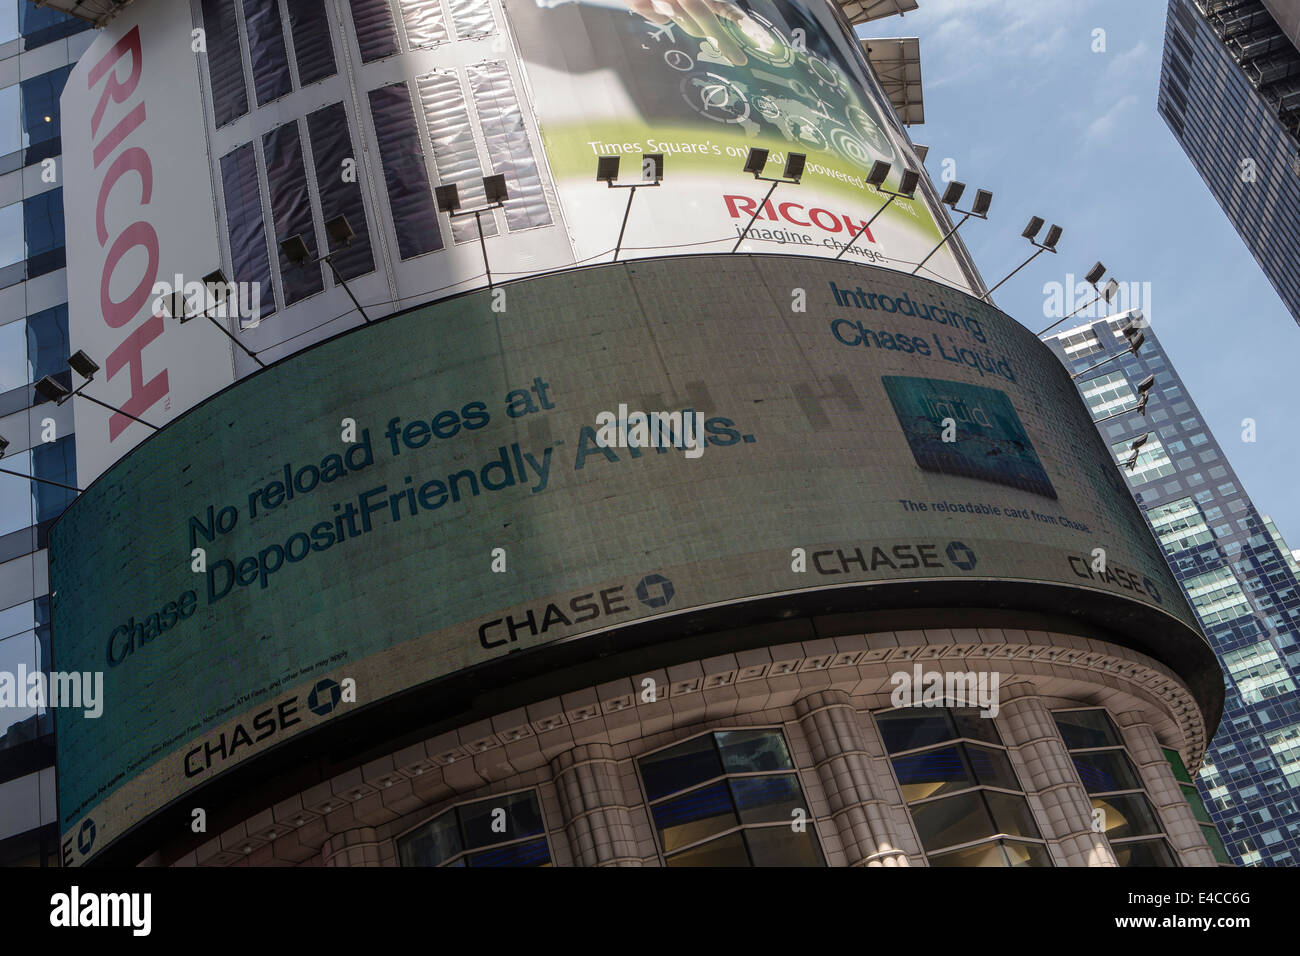 An electronic billboard advertisement shows an ad for Chase Liquid Reloadable Card in the New York City borough of Manhattan, NY Stock Photo